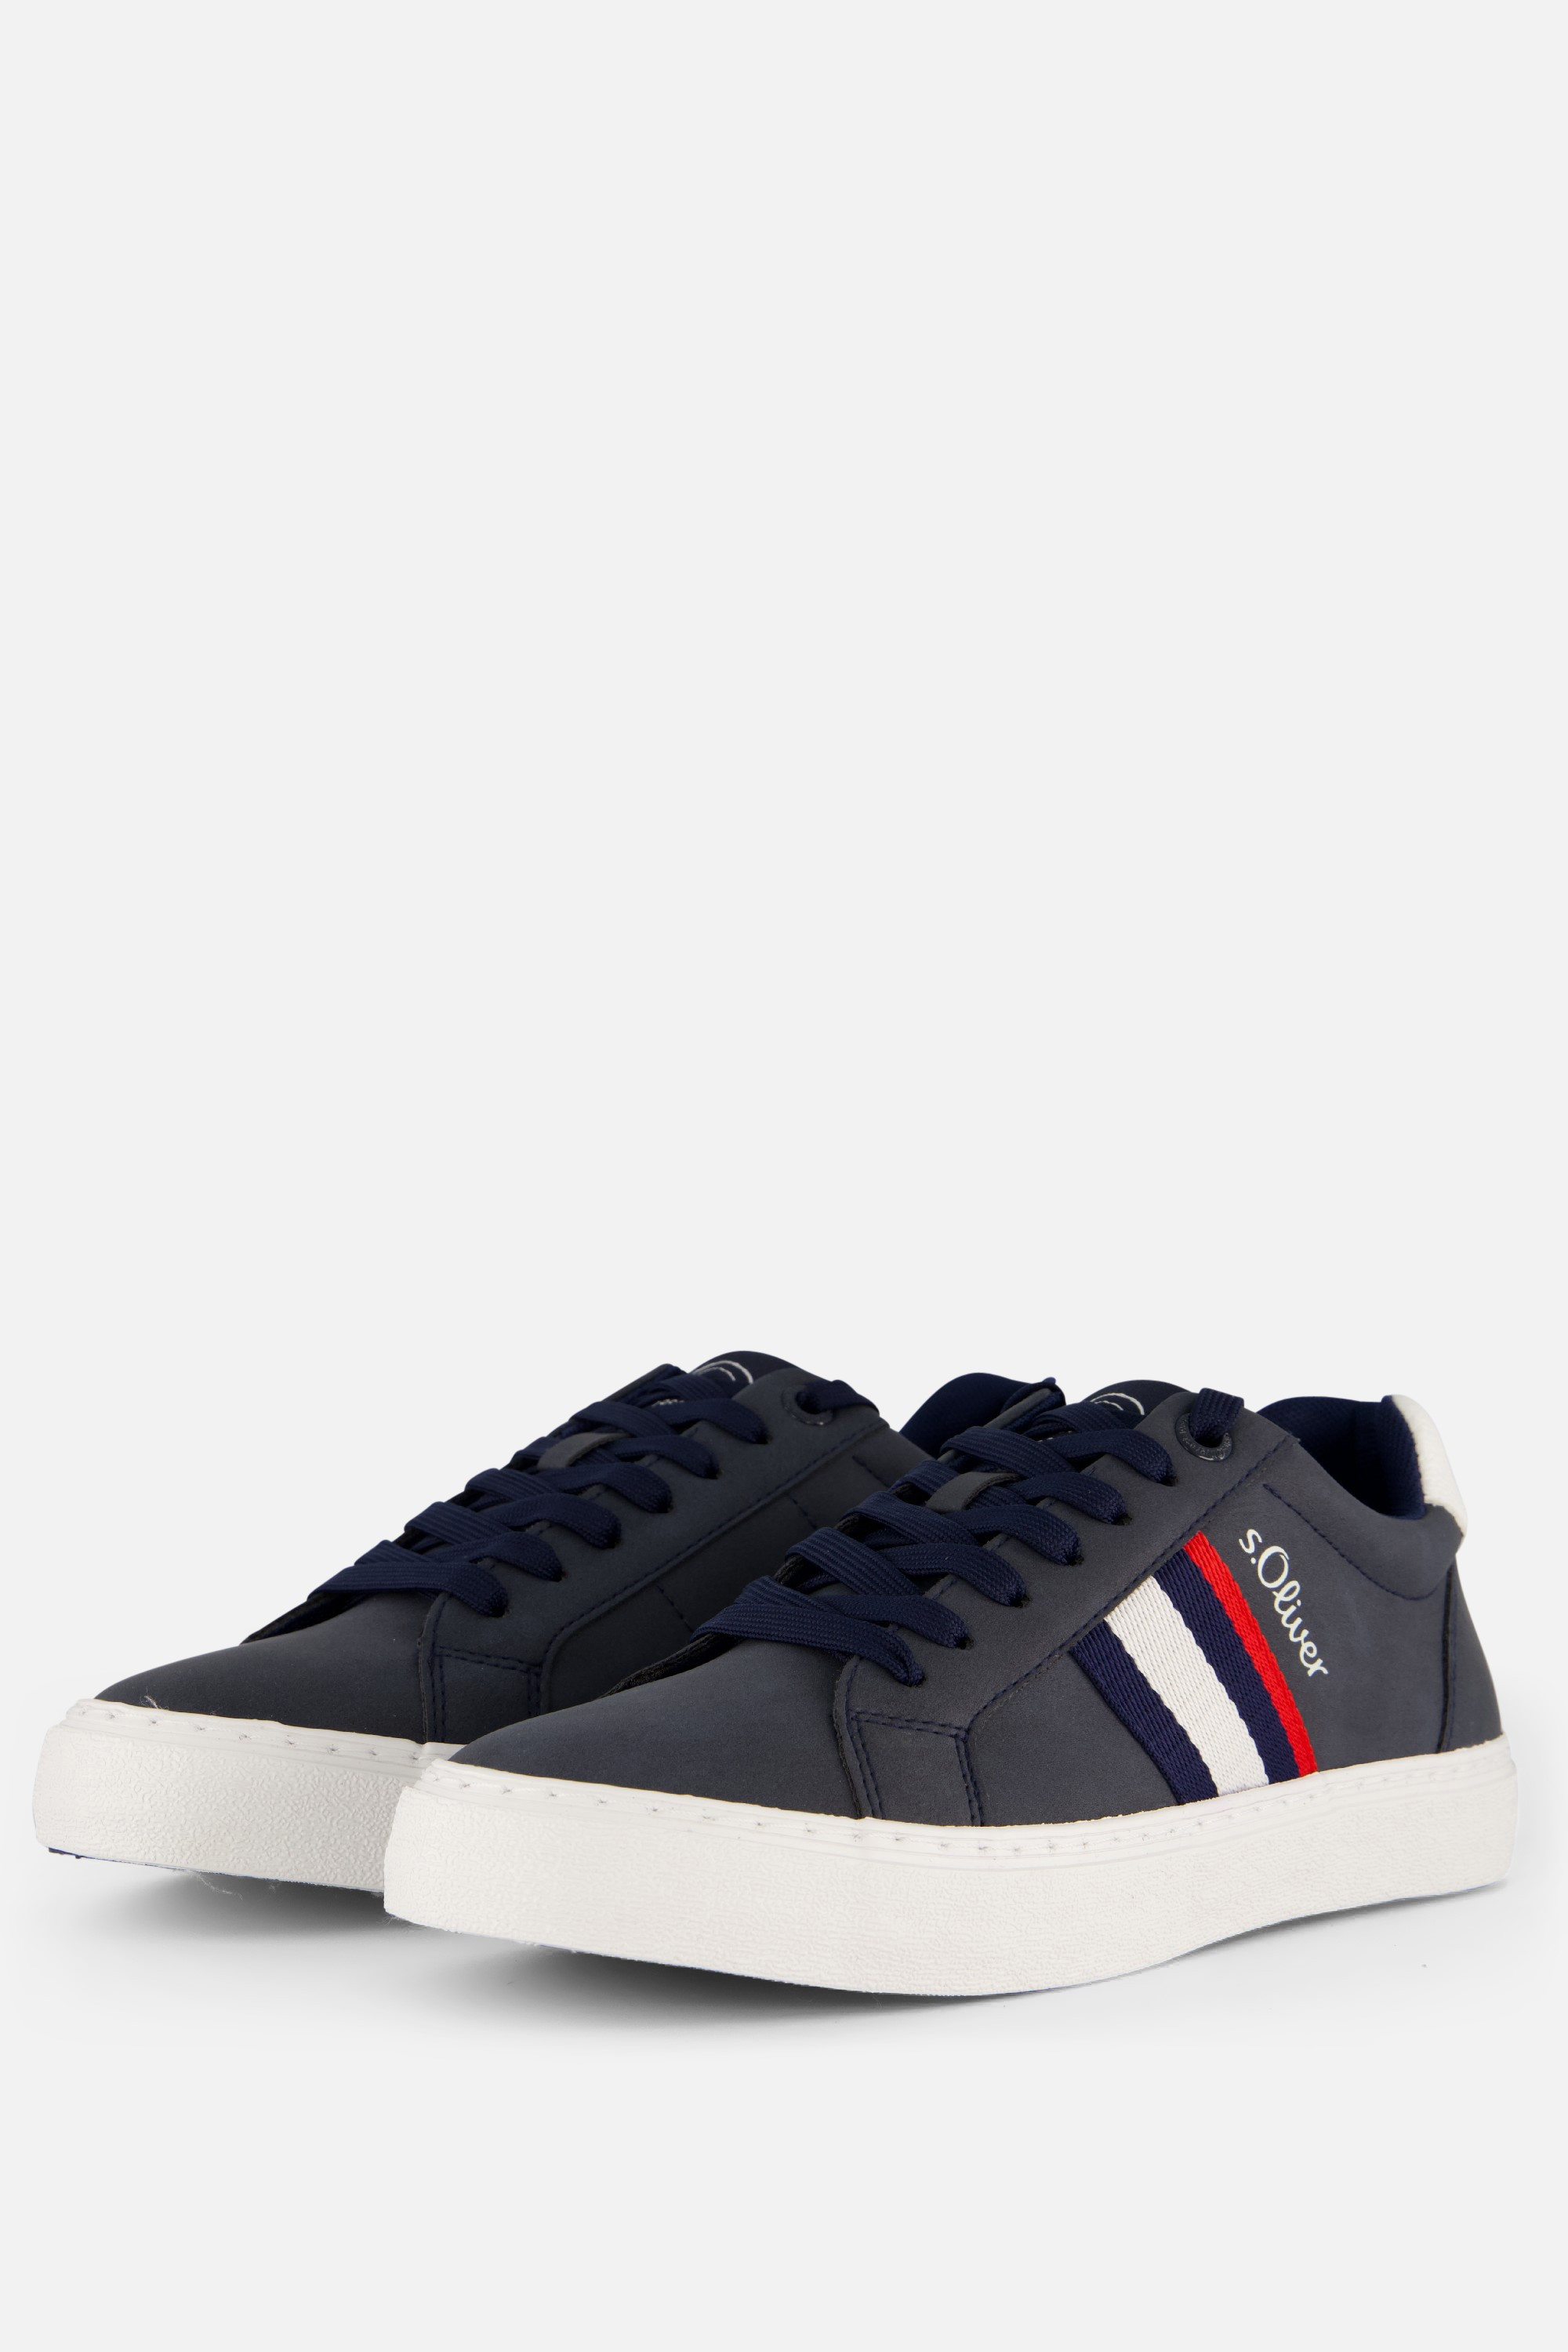 S.Oliver s.Oliver Sneakers blauw Synthetisch